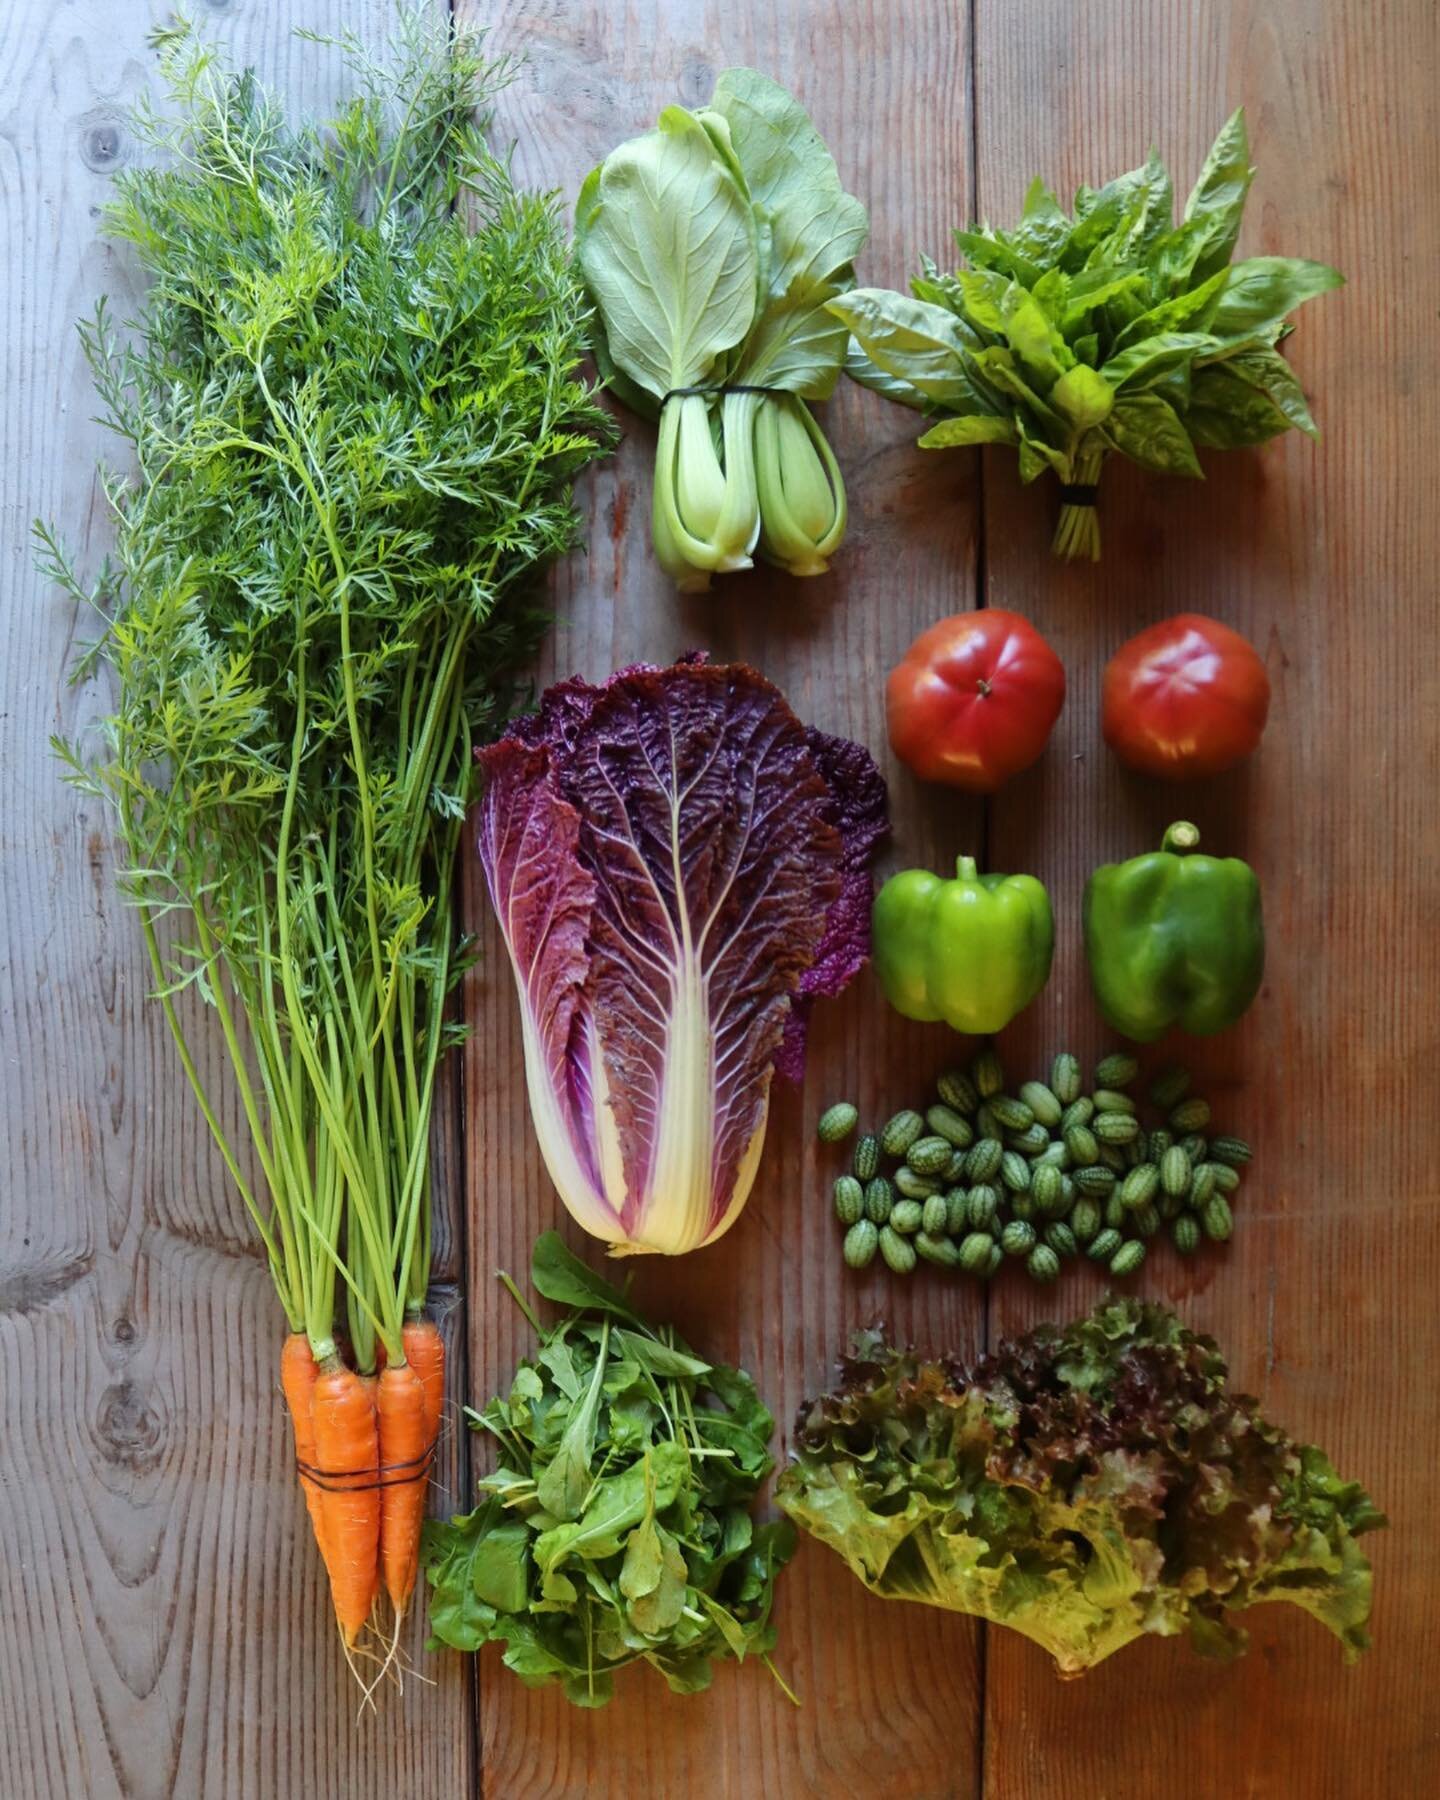 Our final box of the summer CSA has arrived! Week 18!

Here&rsquo;s a snippet of what we wrote to our CSA members in the newsletter this week: The final share of the summer CSA has arrived! For 18 weeks you have been eating the food we grow from this